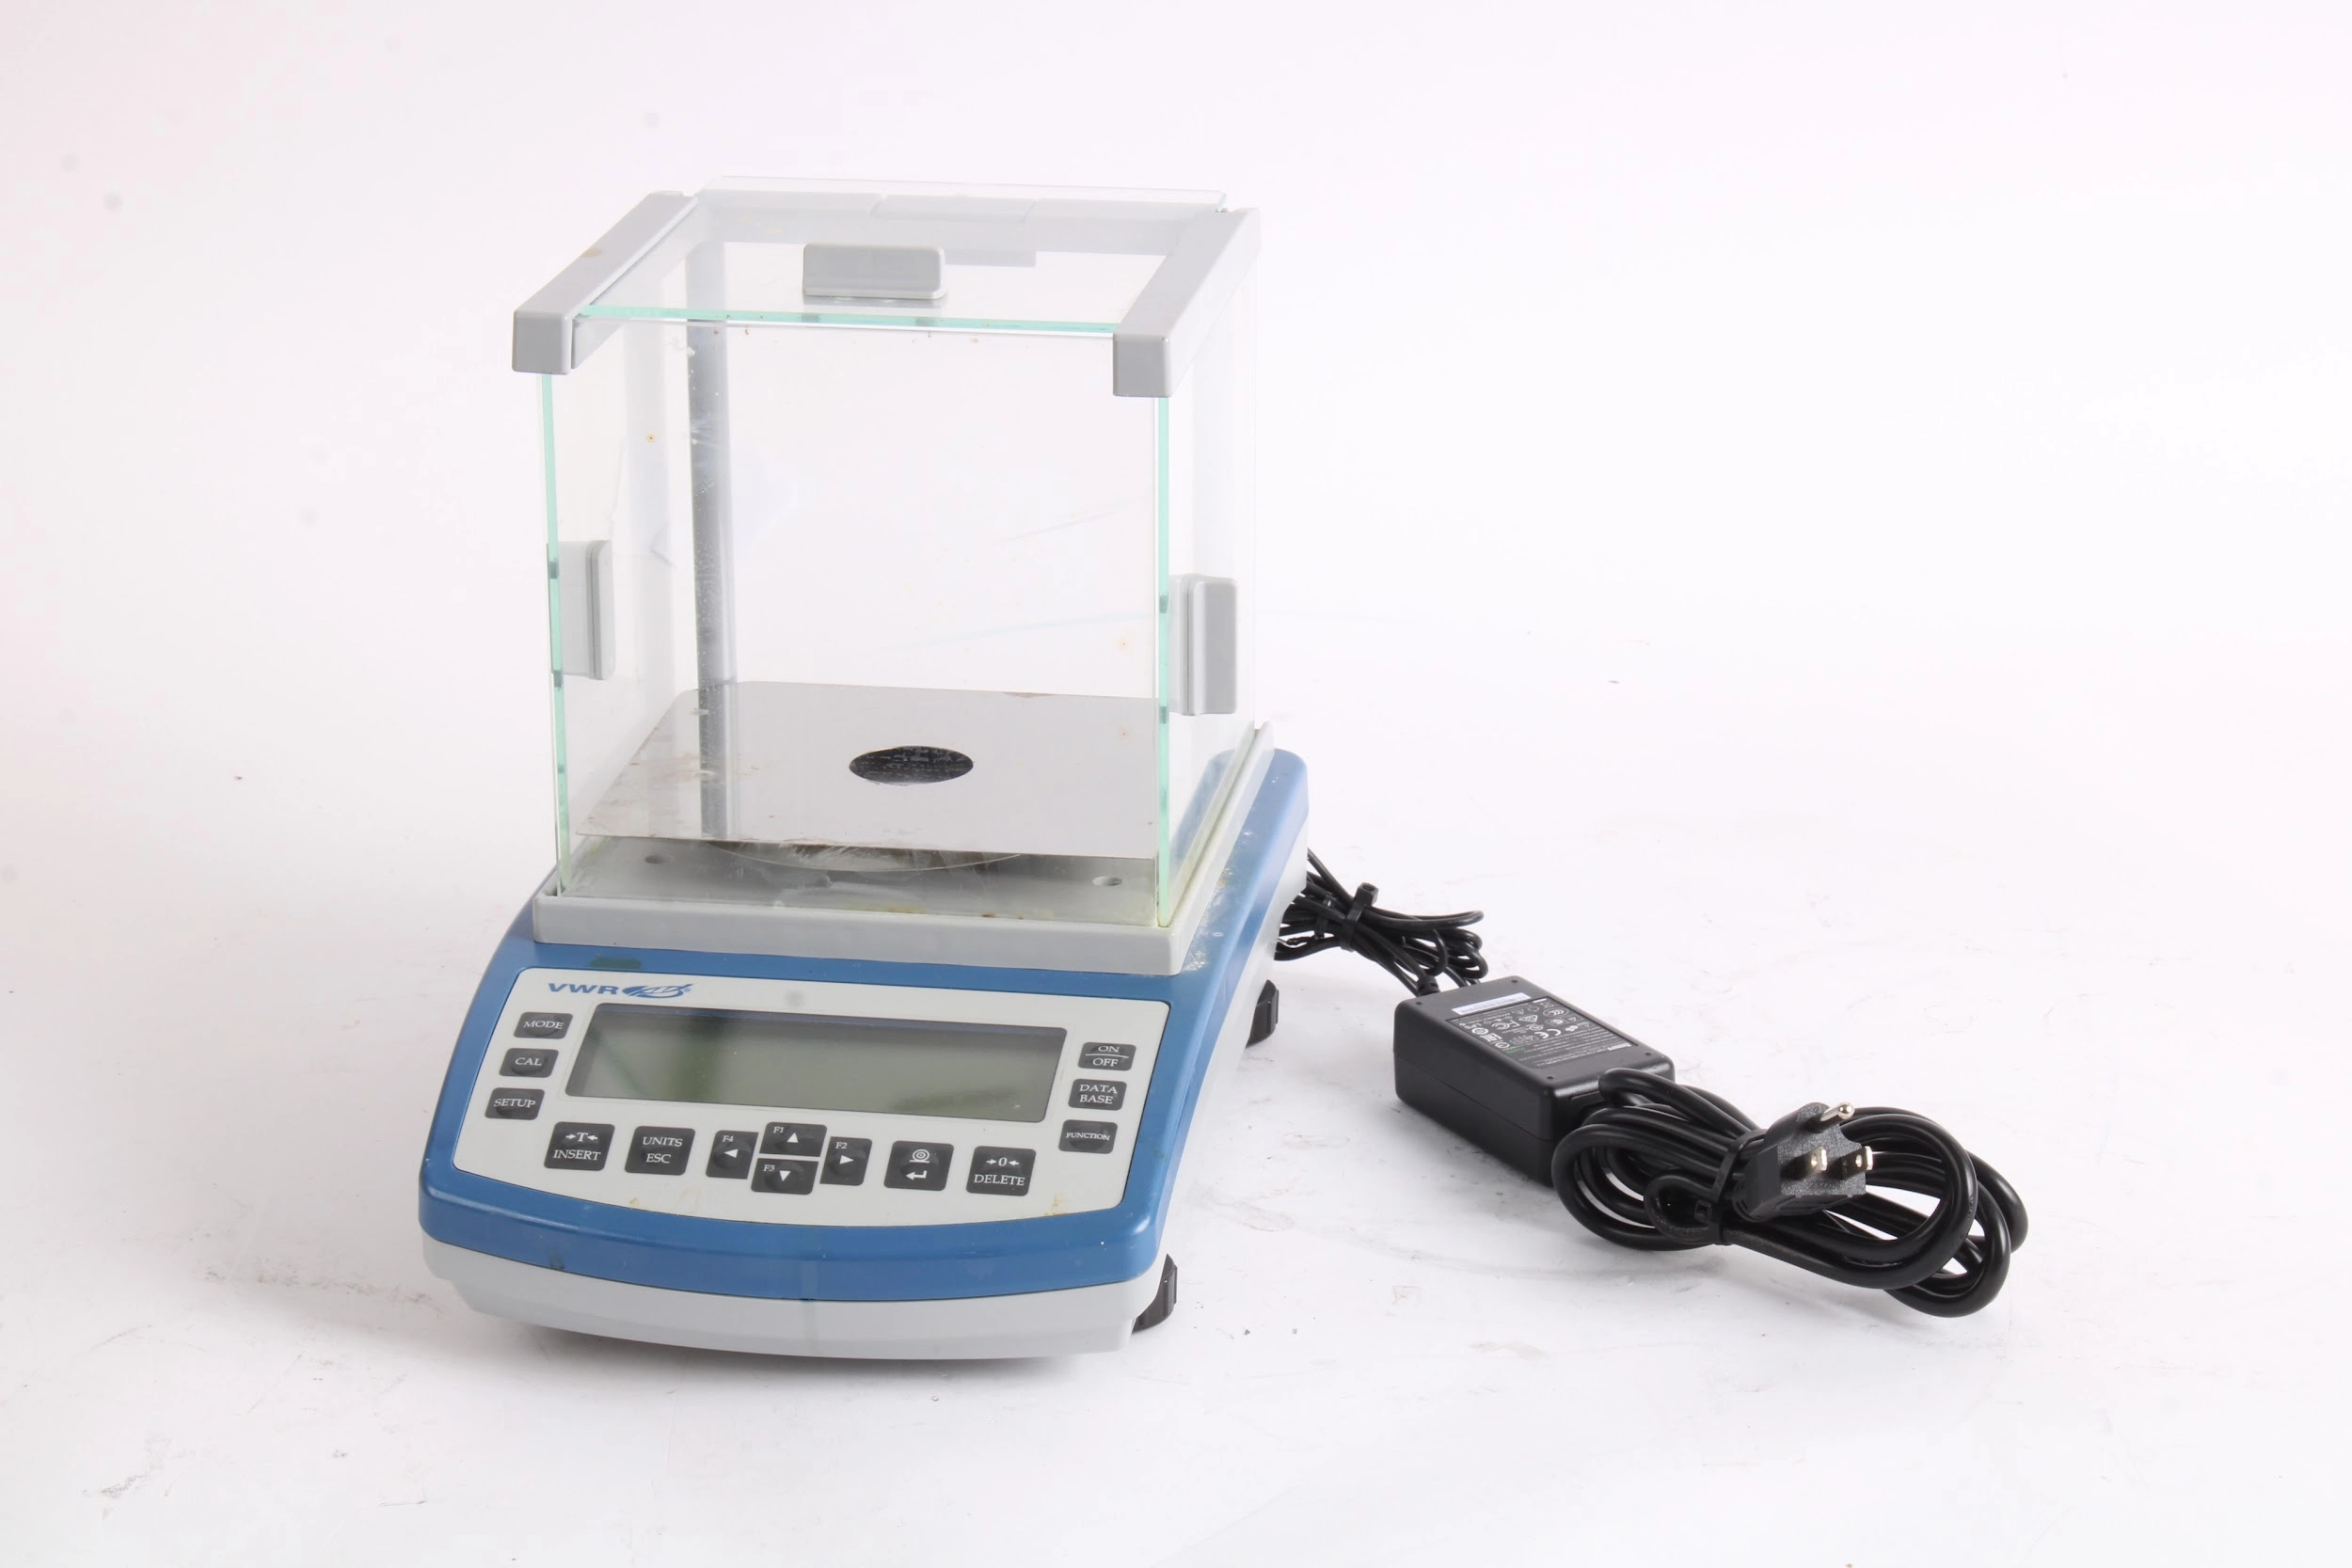 VWR B2-Series VWR-124B Analytical and Precision Balance With Power supply